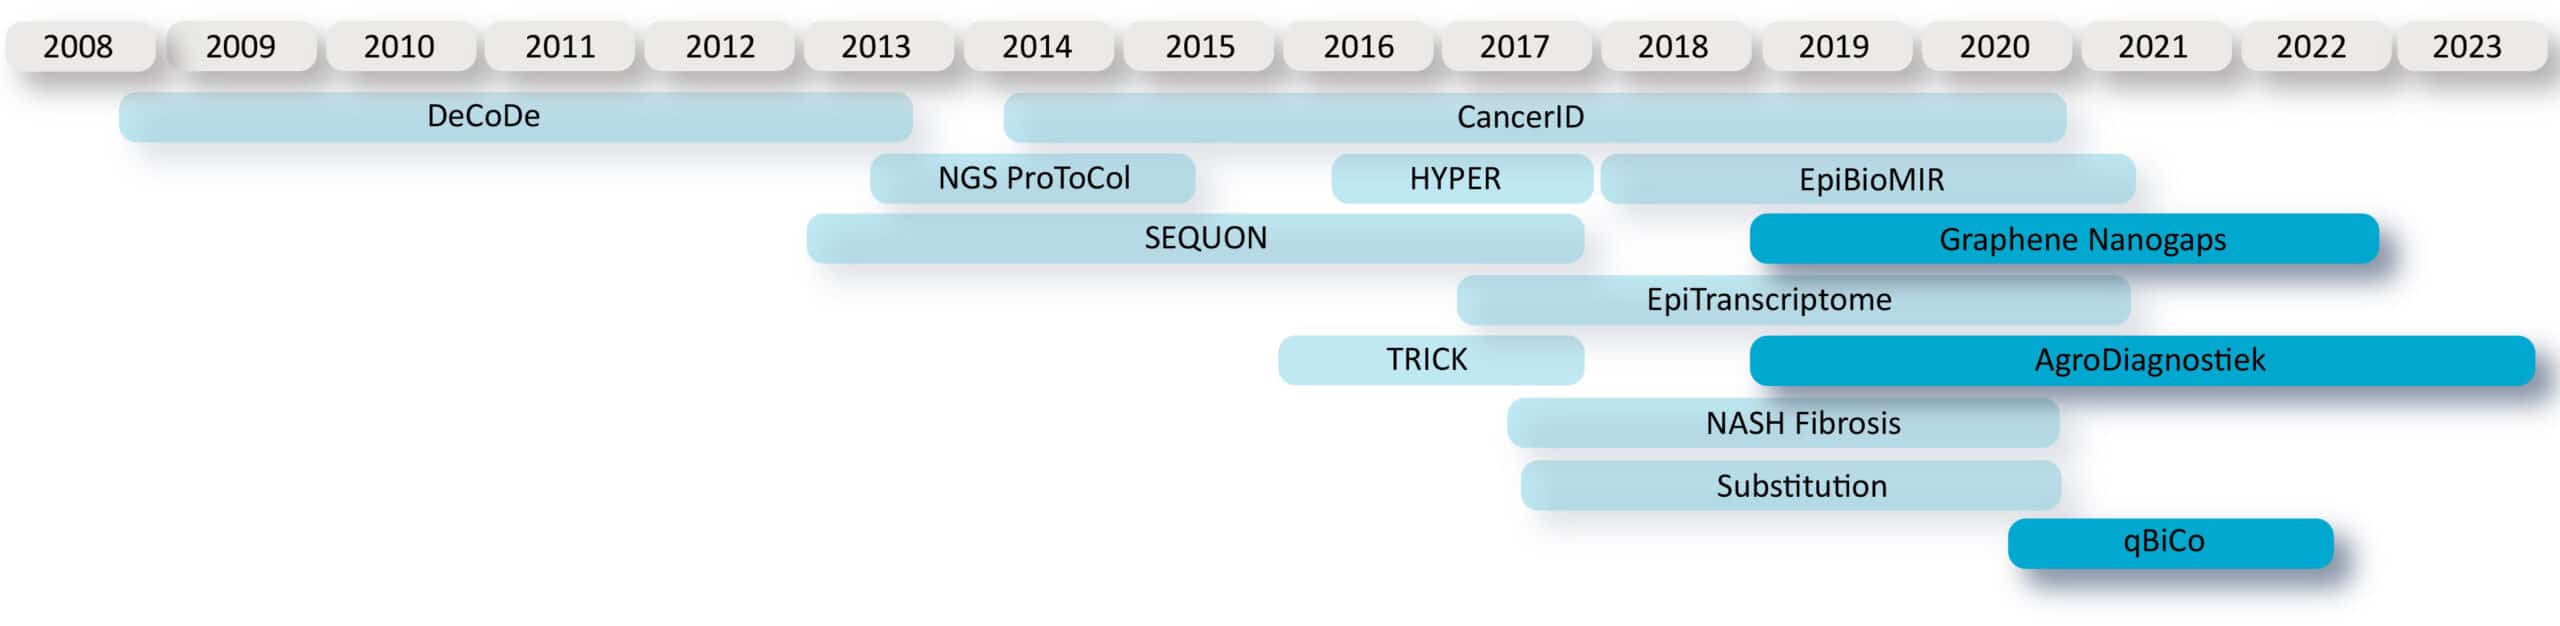 20210526 webpage NL funded timeline MGL v3 scaled EU and NL Funded GenomeScan Projects